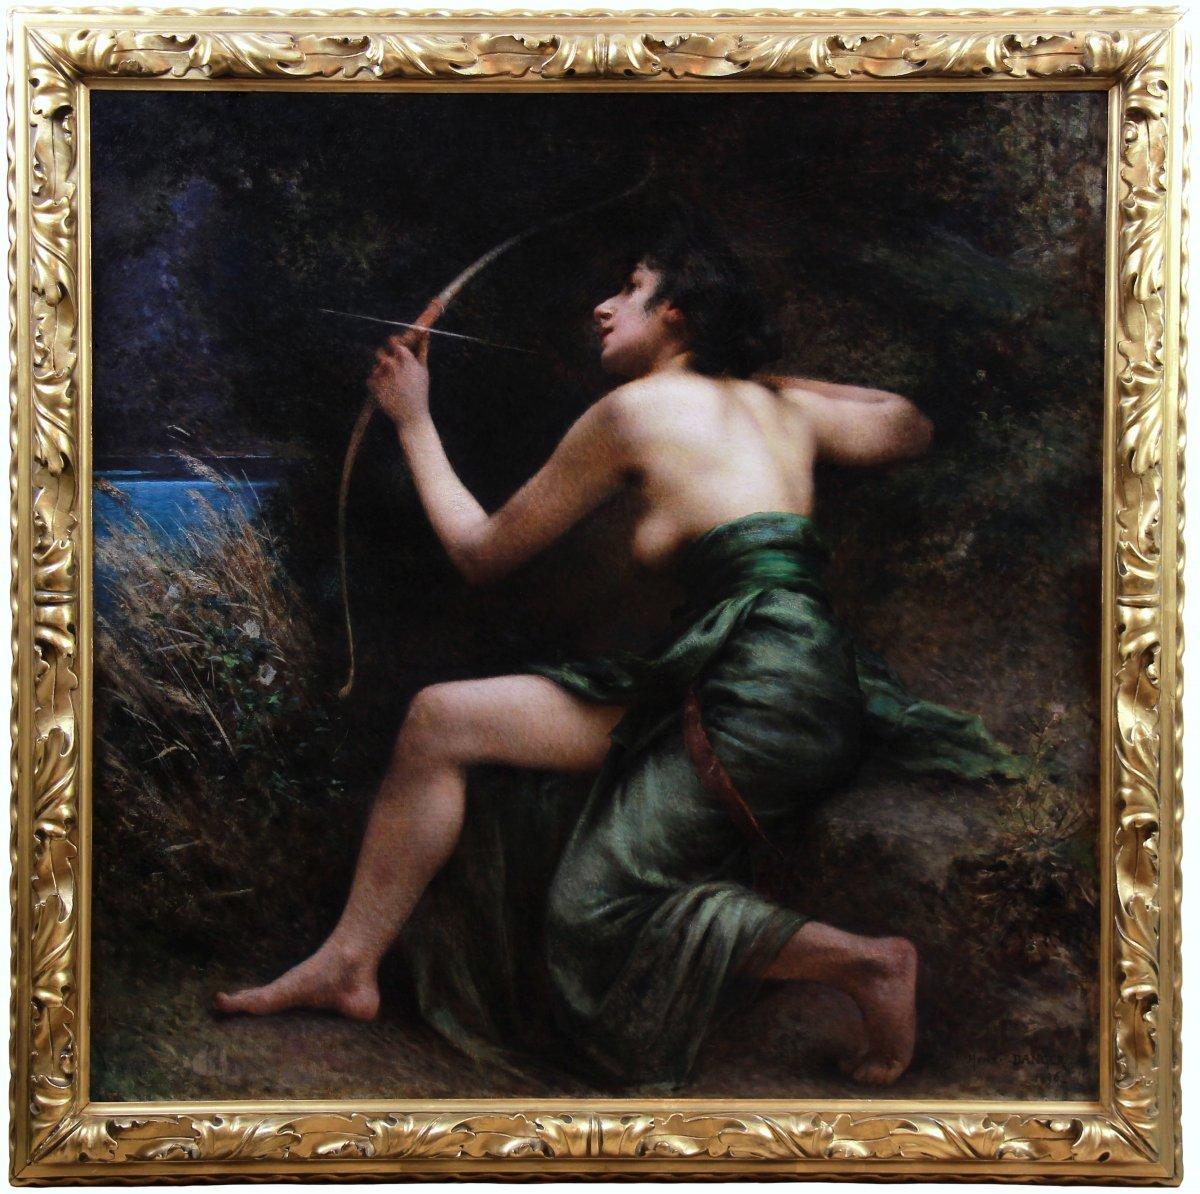 Henri-camille Danger ( 1857-1937 ) Figurative Painting - Oil On Canvas "The Goddess Artemis" 19th Century French school